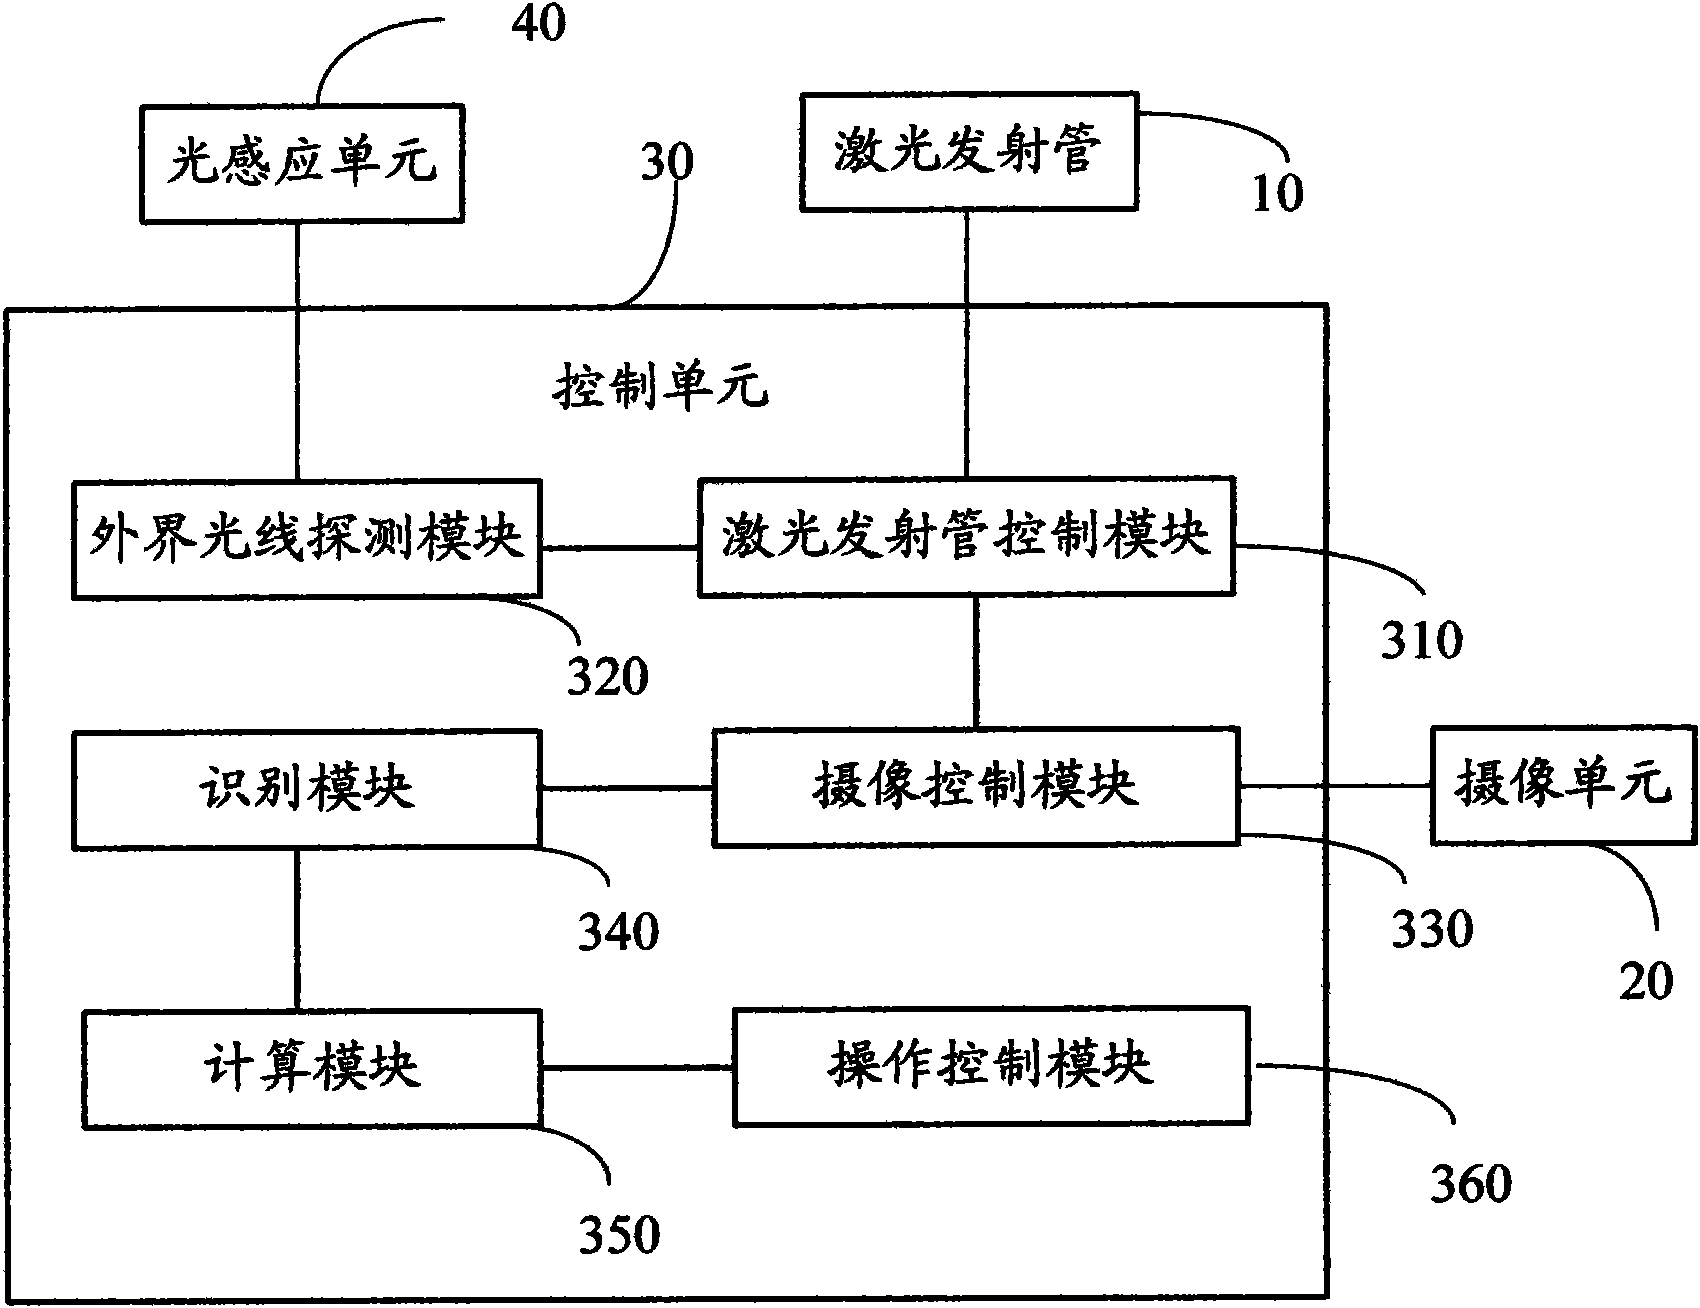 Electronic device with ranging function, ranging system and ranging method